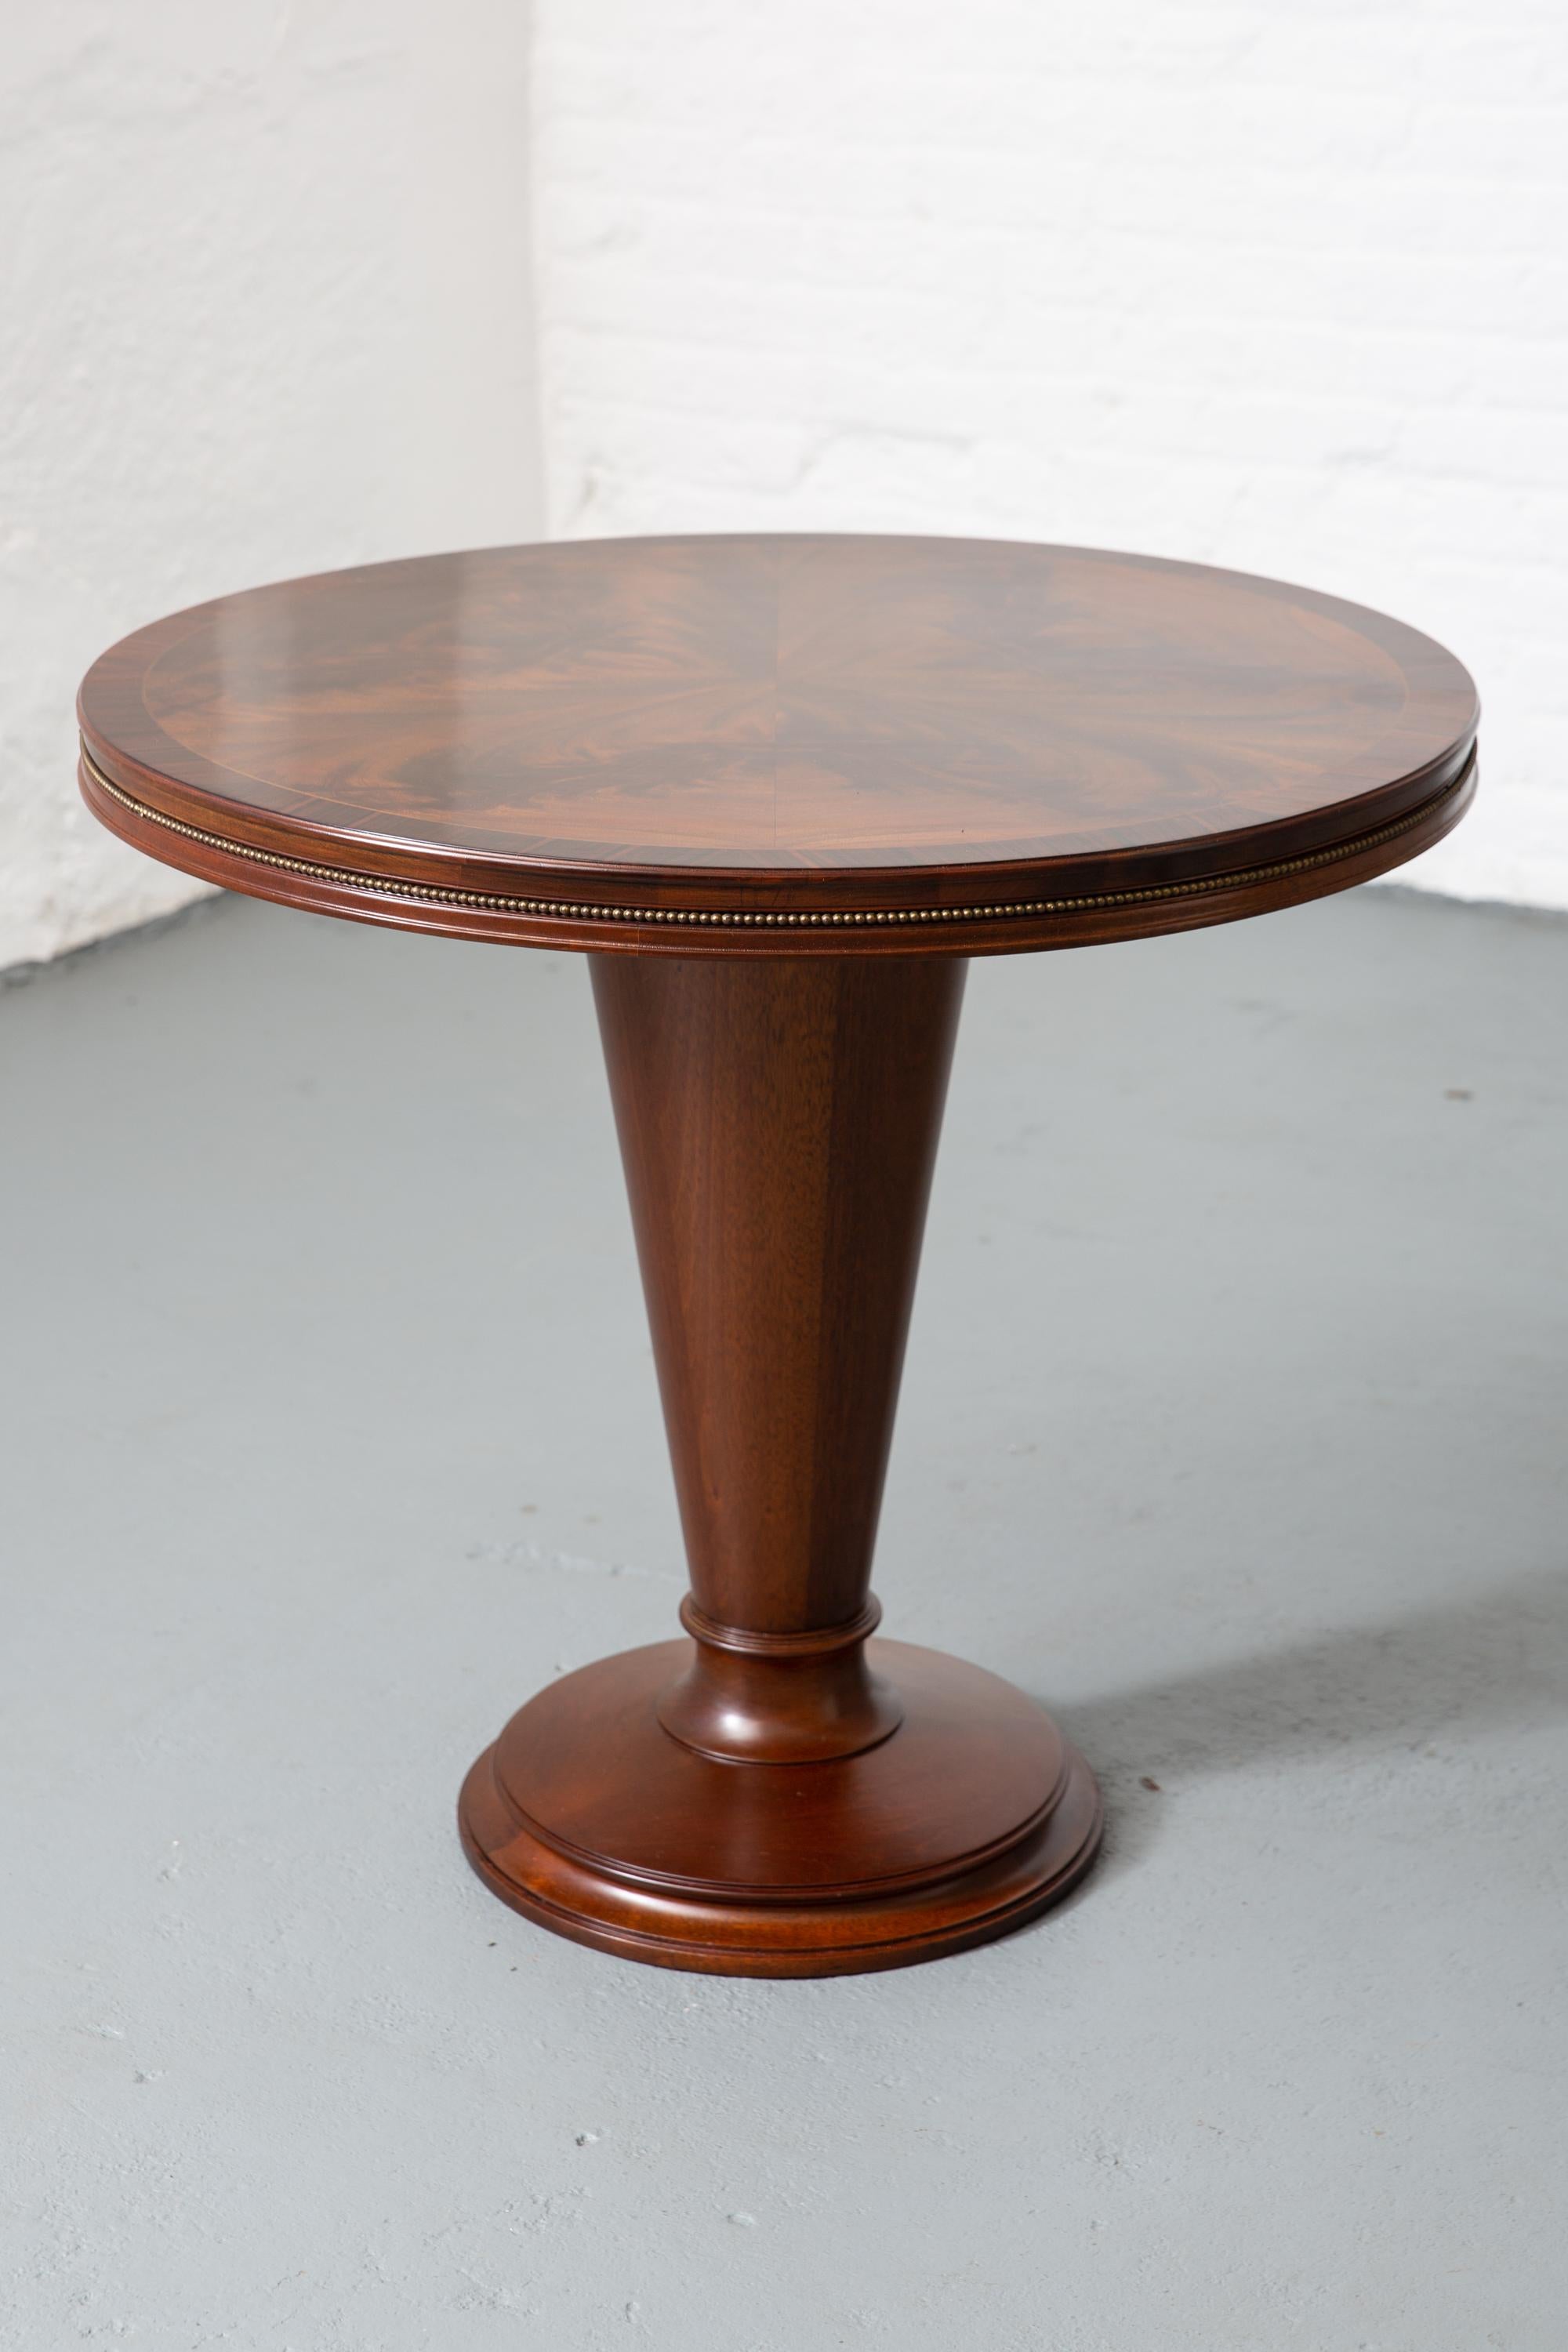 1940's Art Deco Round Center Table with Book Matched Flame Top For Sale 3